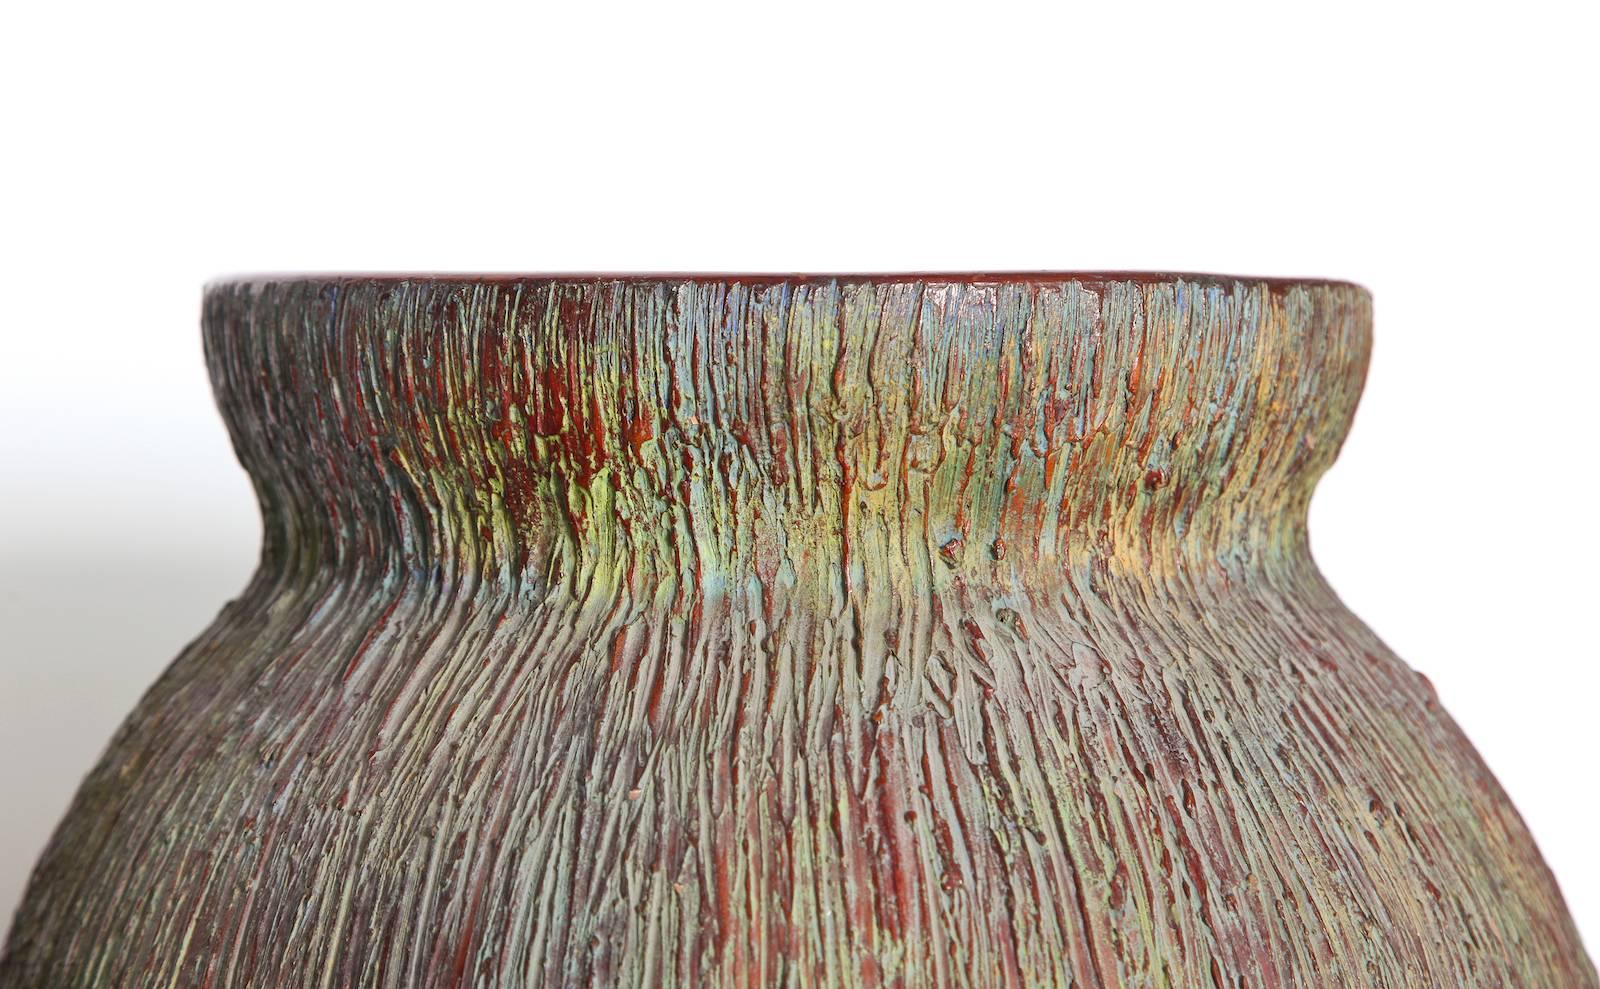 Large-scale textured vase by Zaccagnini.  Handmade earthenware vase form with great scale. Roughly textured throughout entire exterior, with multicolored glazes. Interior is smooth with a brown glaze. Signed on underside with manufacturer’s marks.